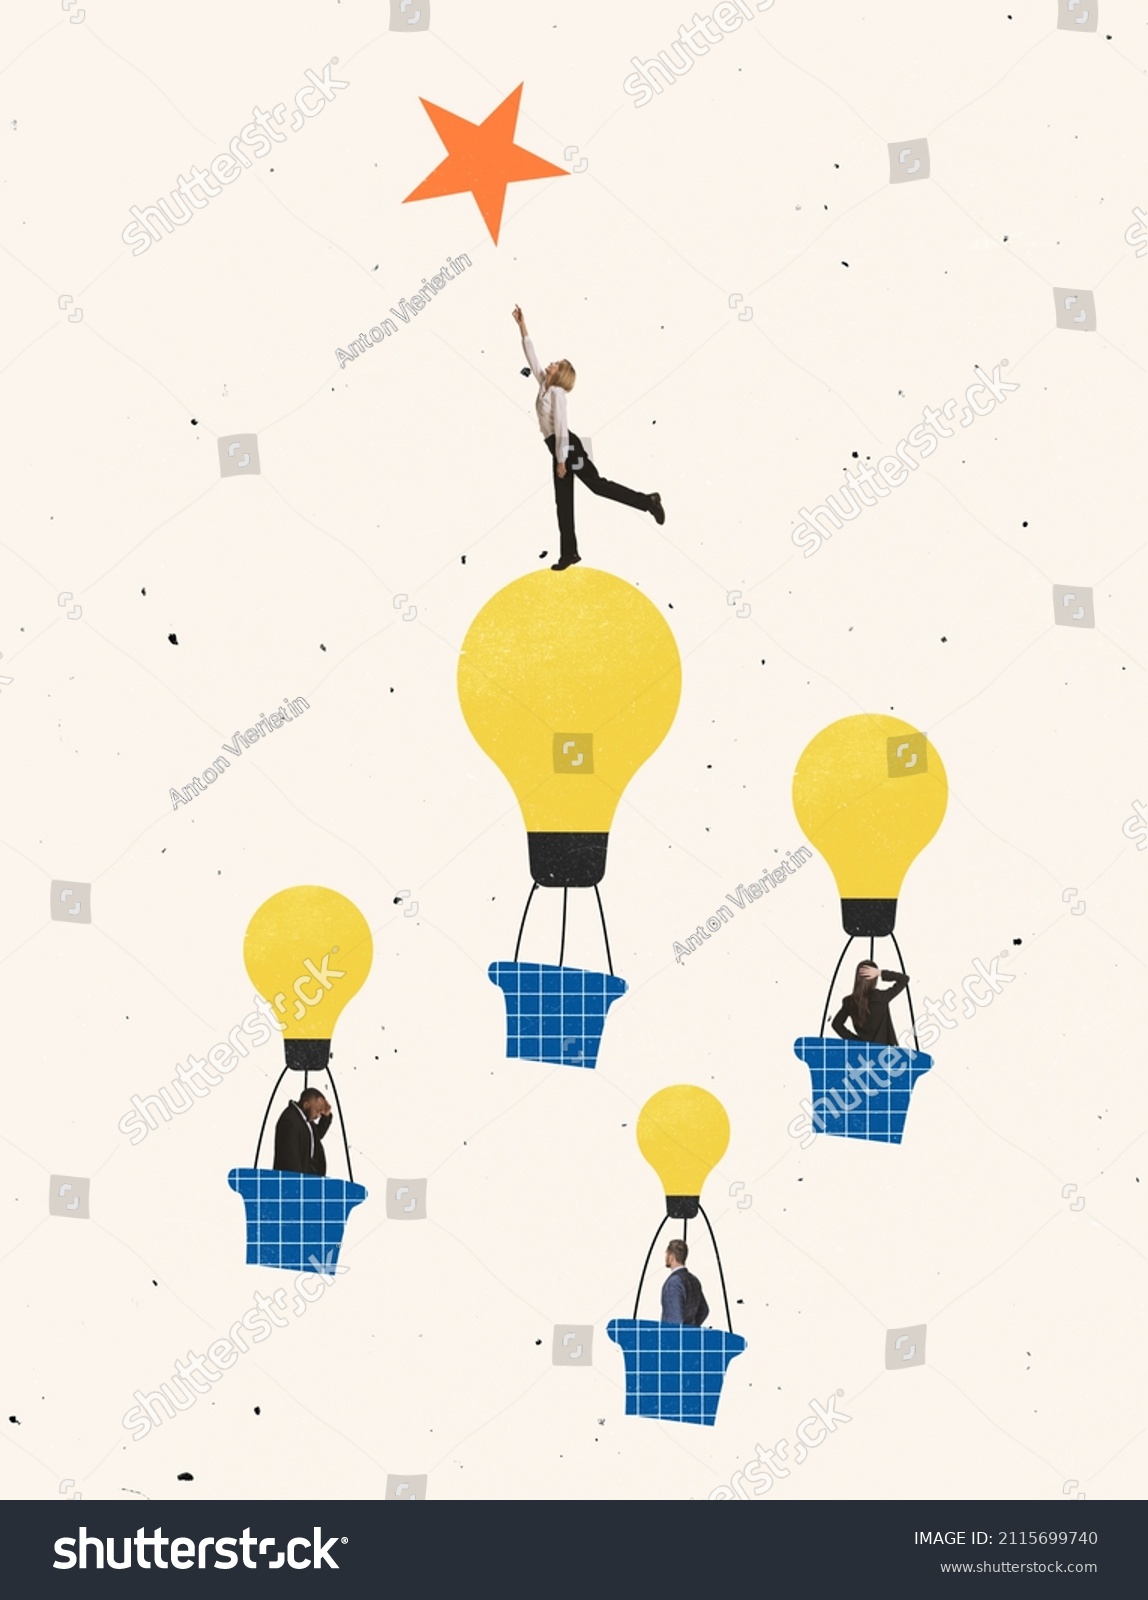 Creative design. Contemporary art collage. Employees on hot air balloons flying upwards to the star symbolizing creativity and promotion. Concept of business, ideas representation, team, motivation #2115699740